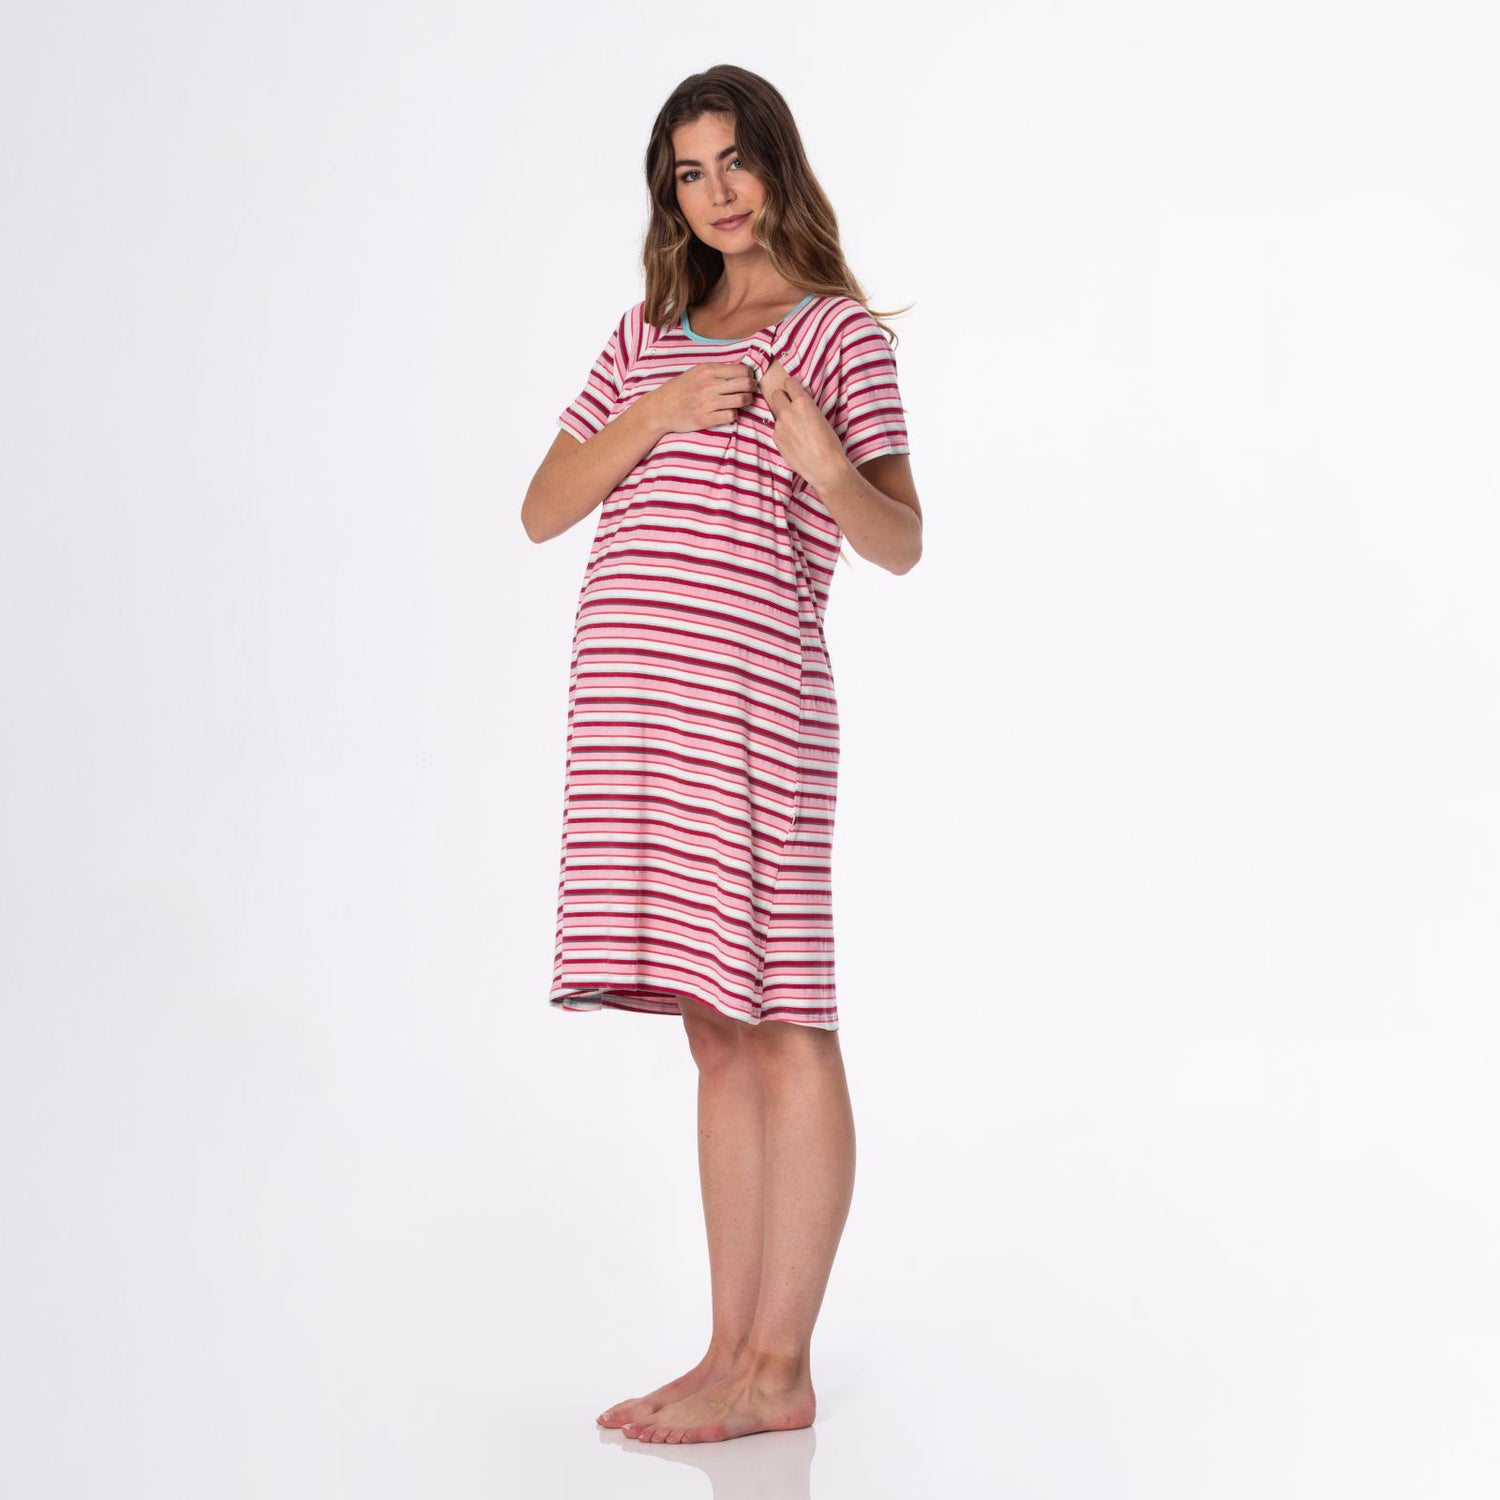 Women's Print Hospital Gown in Anniversary Bobsled Stripe